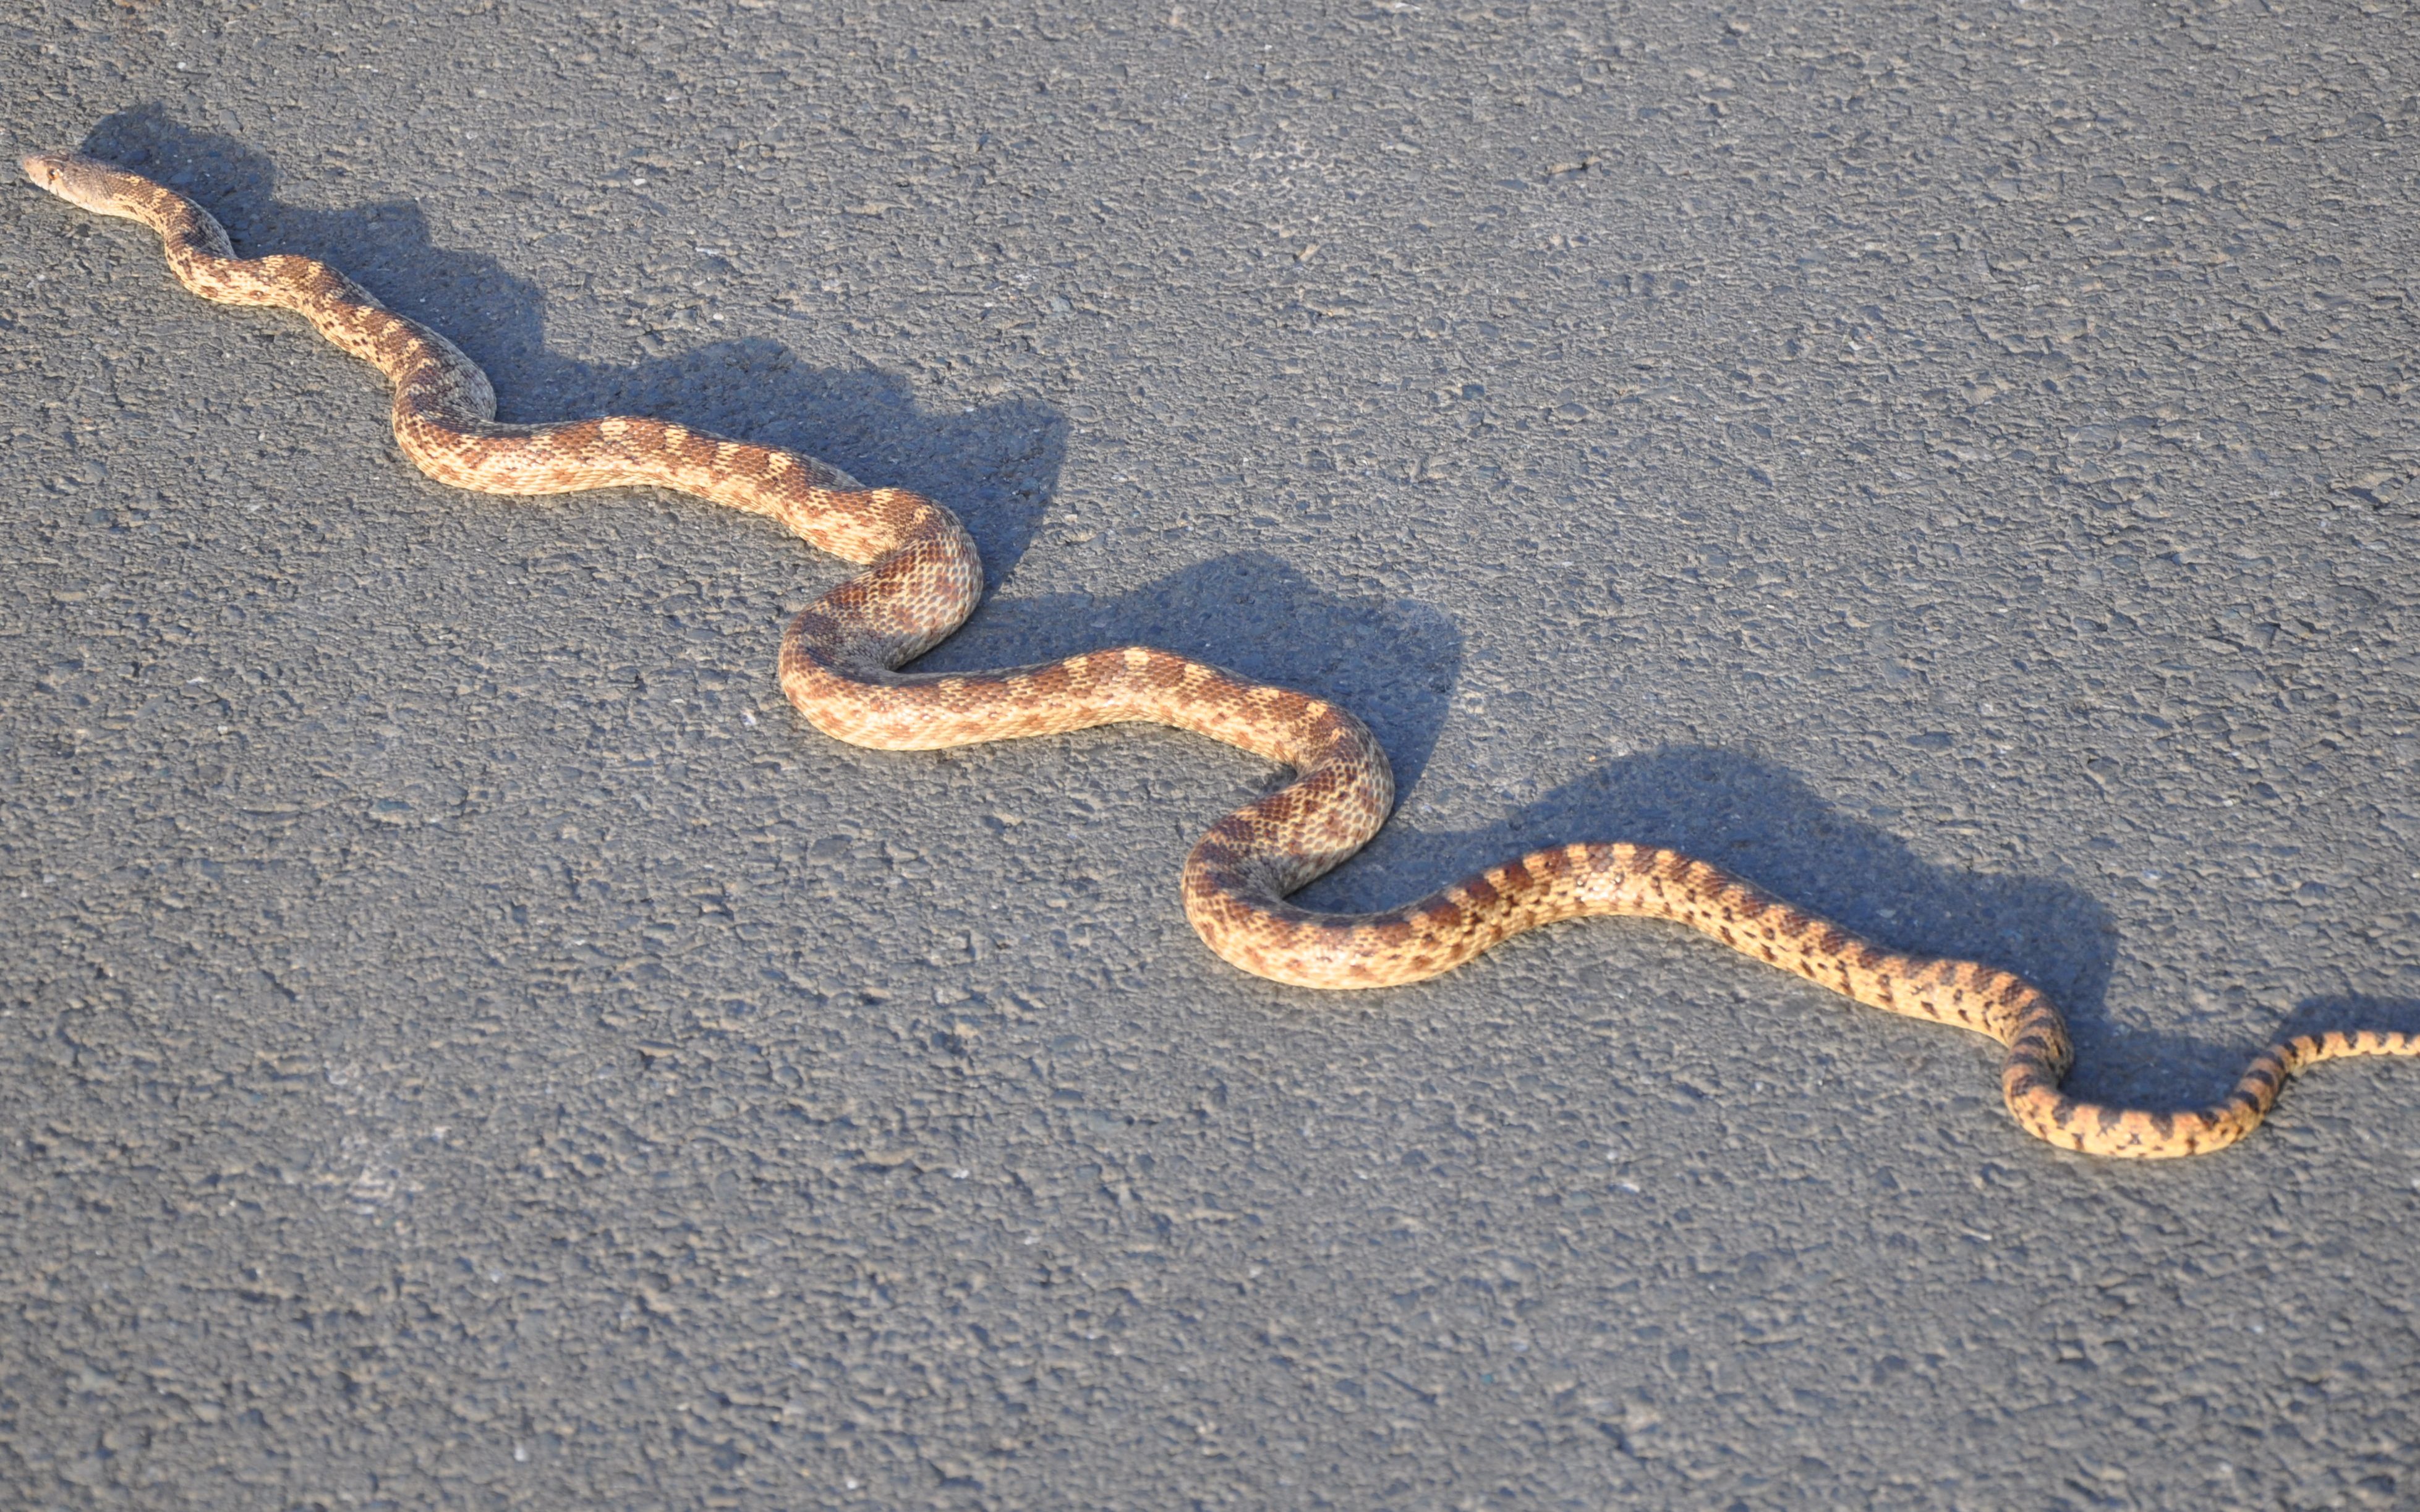 A Gopher Snake on Pillow Road | Pillow Road